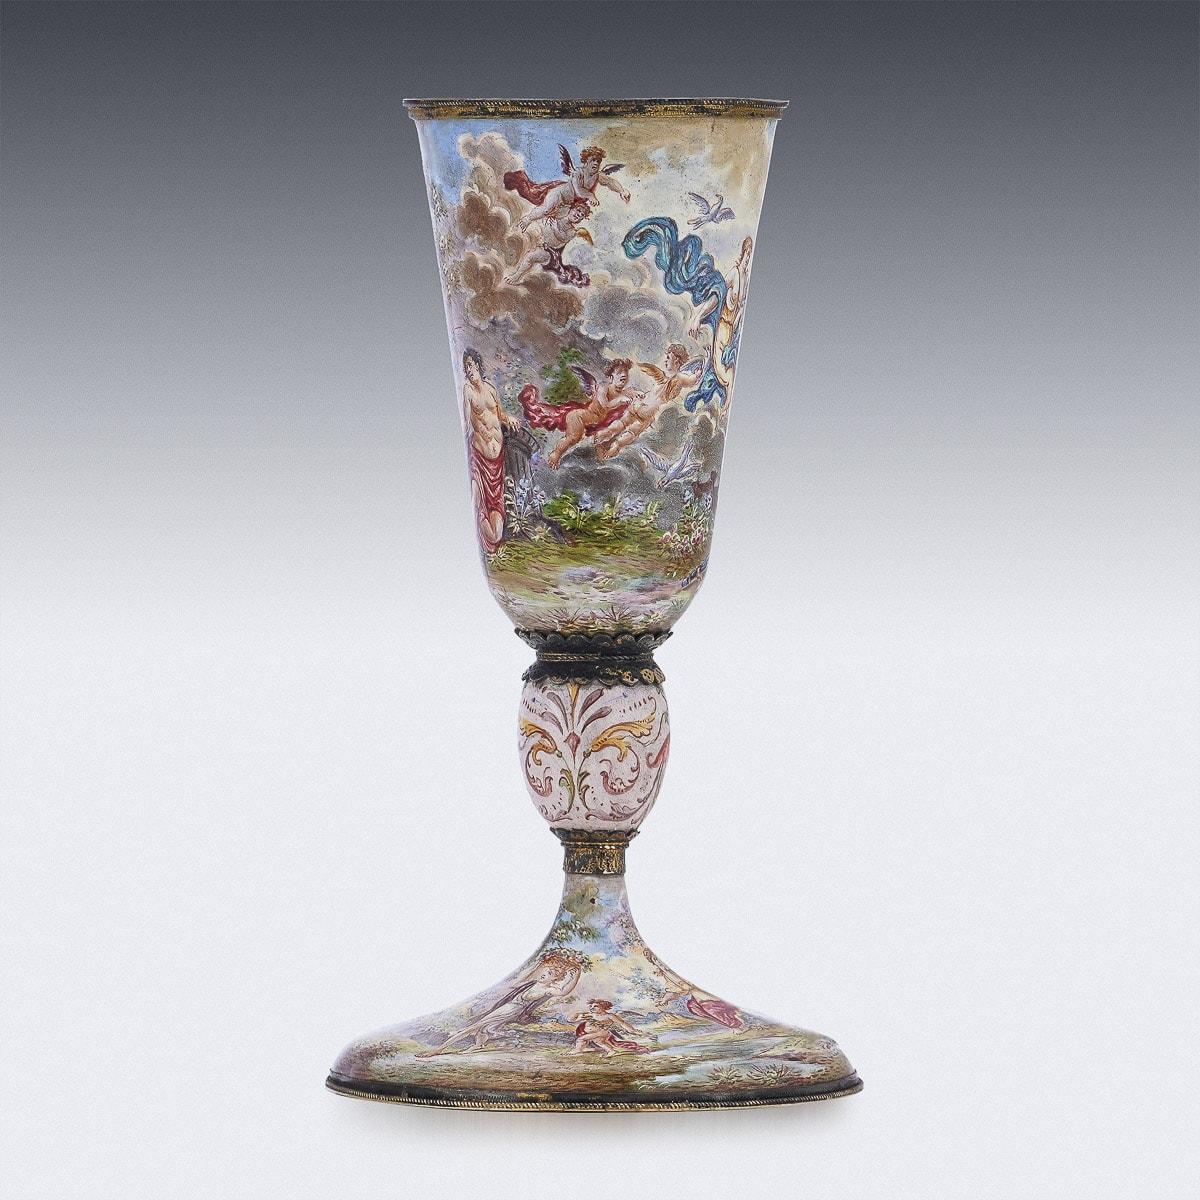 Antique 19th century Austrian Renaissance revival solid silver enameled goblet, the body supported by spreading domed foot, beautifully enamelled with a multicolored foliage decoration and dipicting various romantic scenes. Hallmarked with Austrian